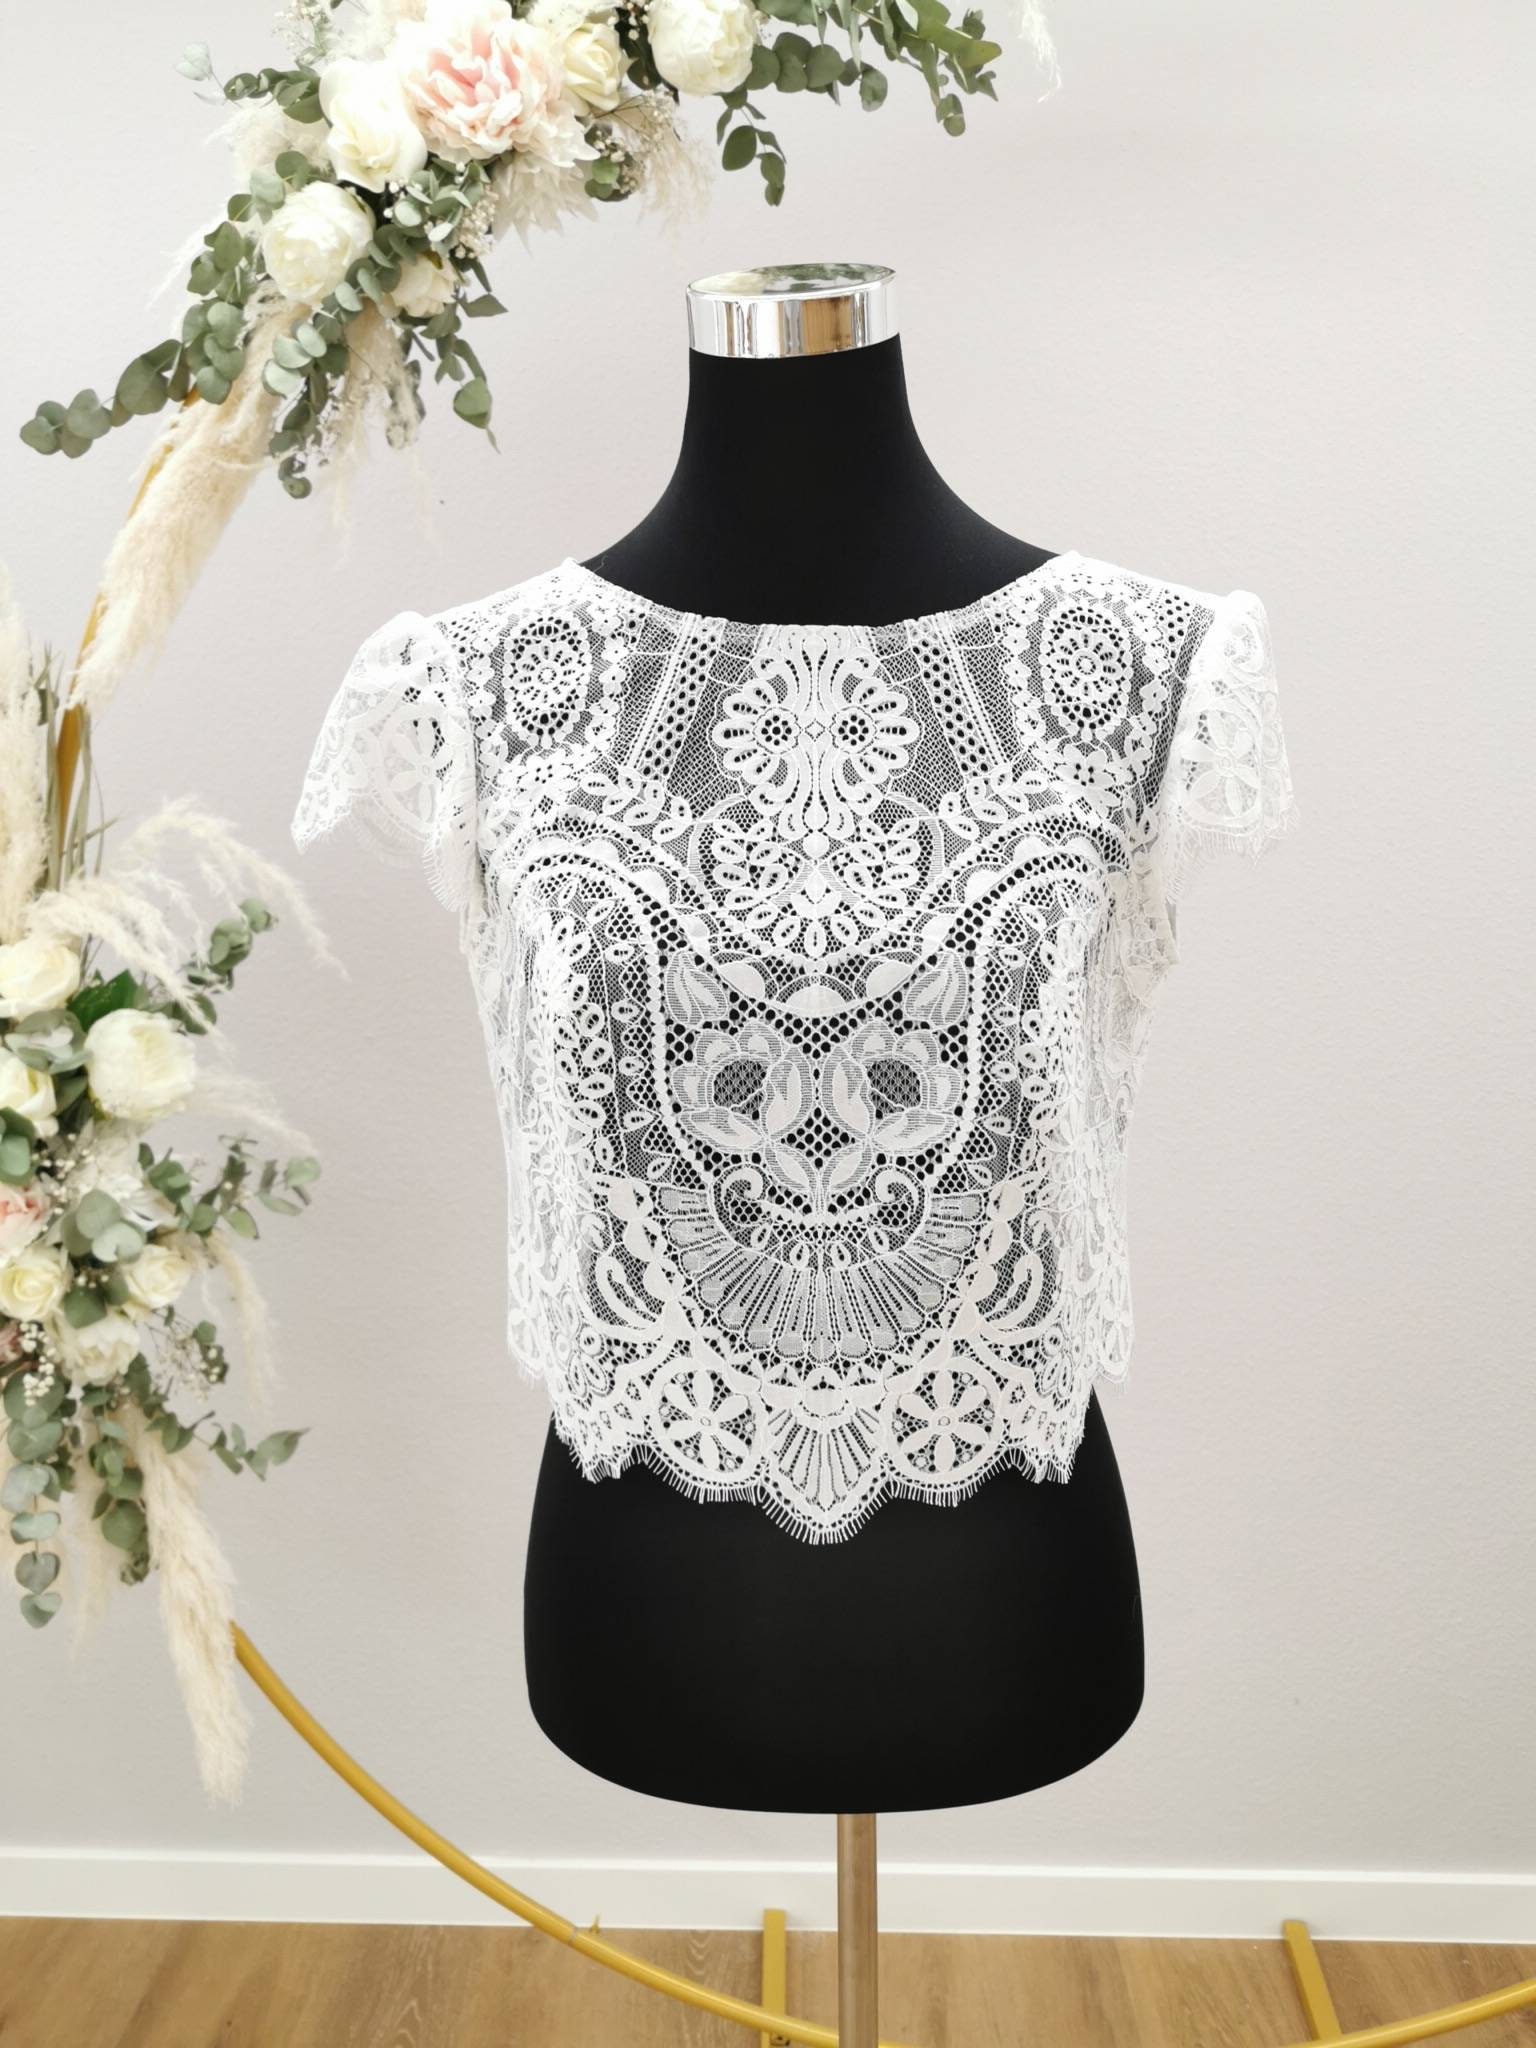 Lace Top Model leandra, Modern Bridal Top in Lace With Short